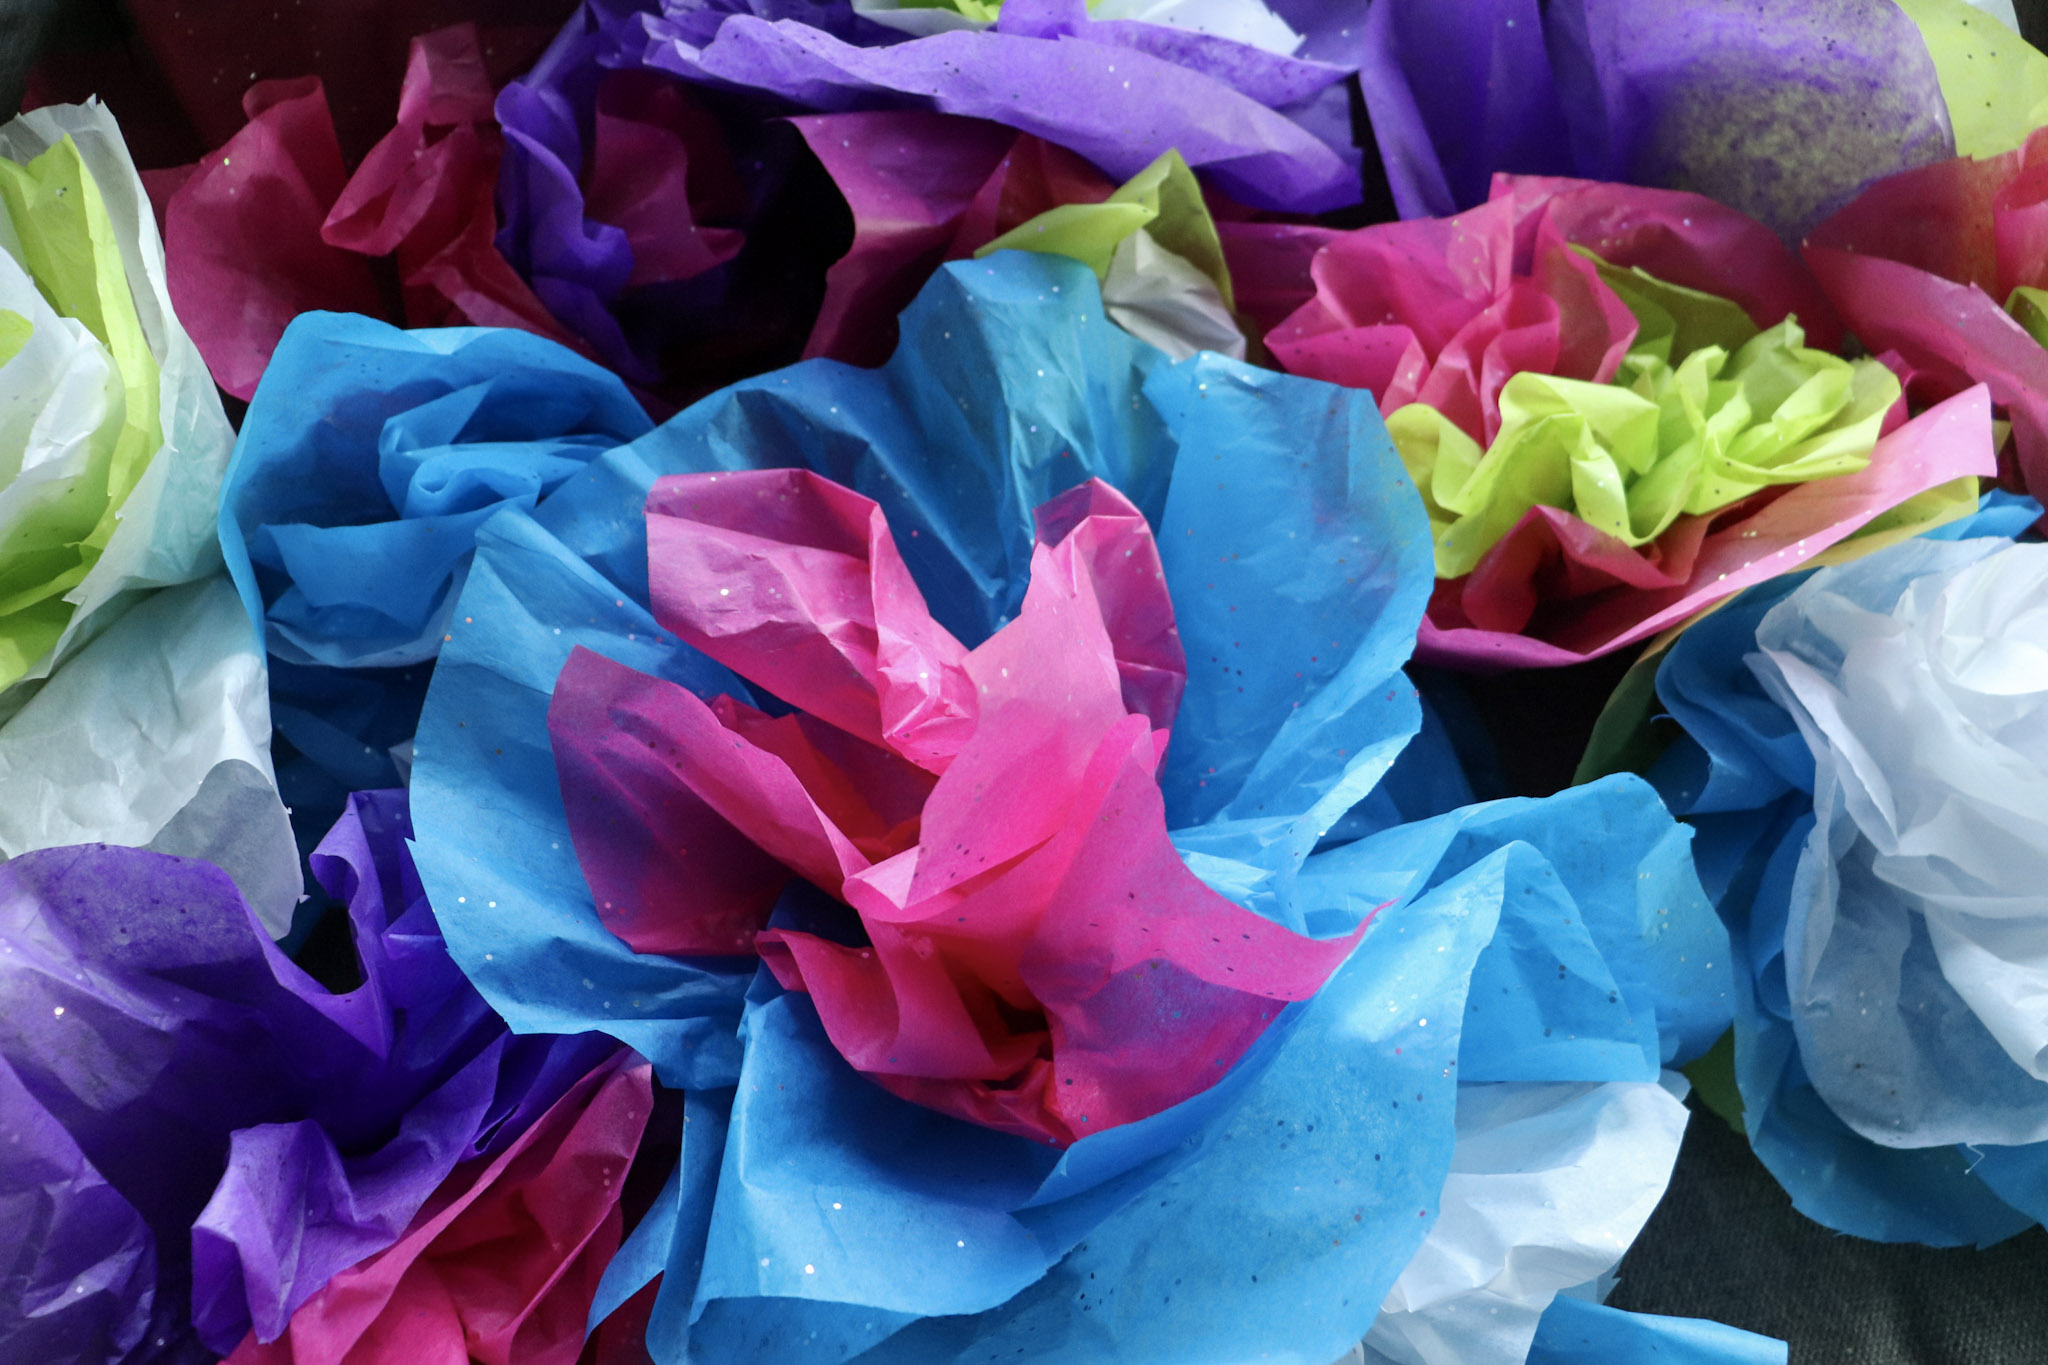 How to Make Flowers Out of Tissue Paper, Tissue Paper Craft, Tissue Paper Crafts, Giant Flowers out of Tissue Paper, Charlotte Artist, Birthday Party Craft Ideas, Birthday Party Decorations